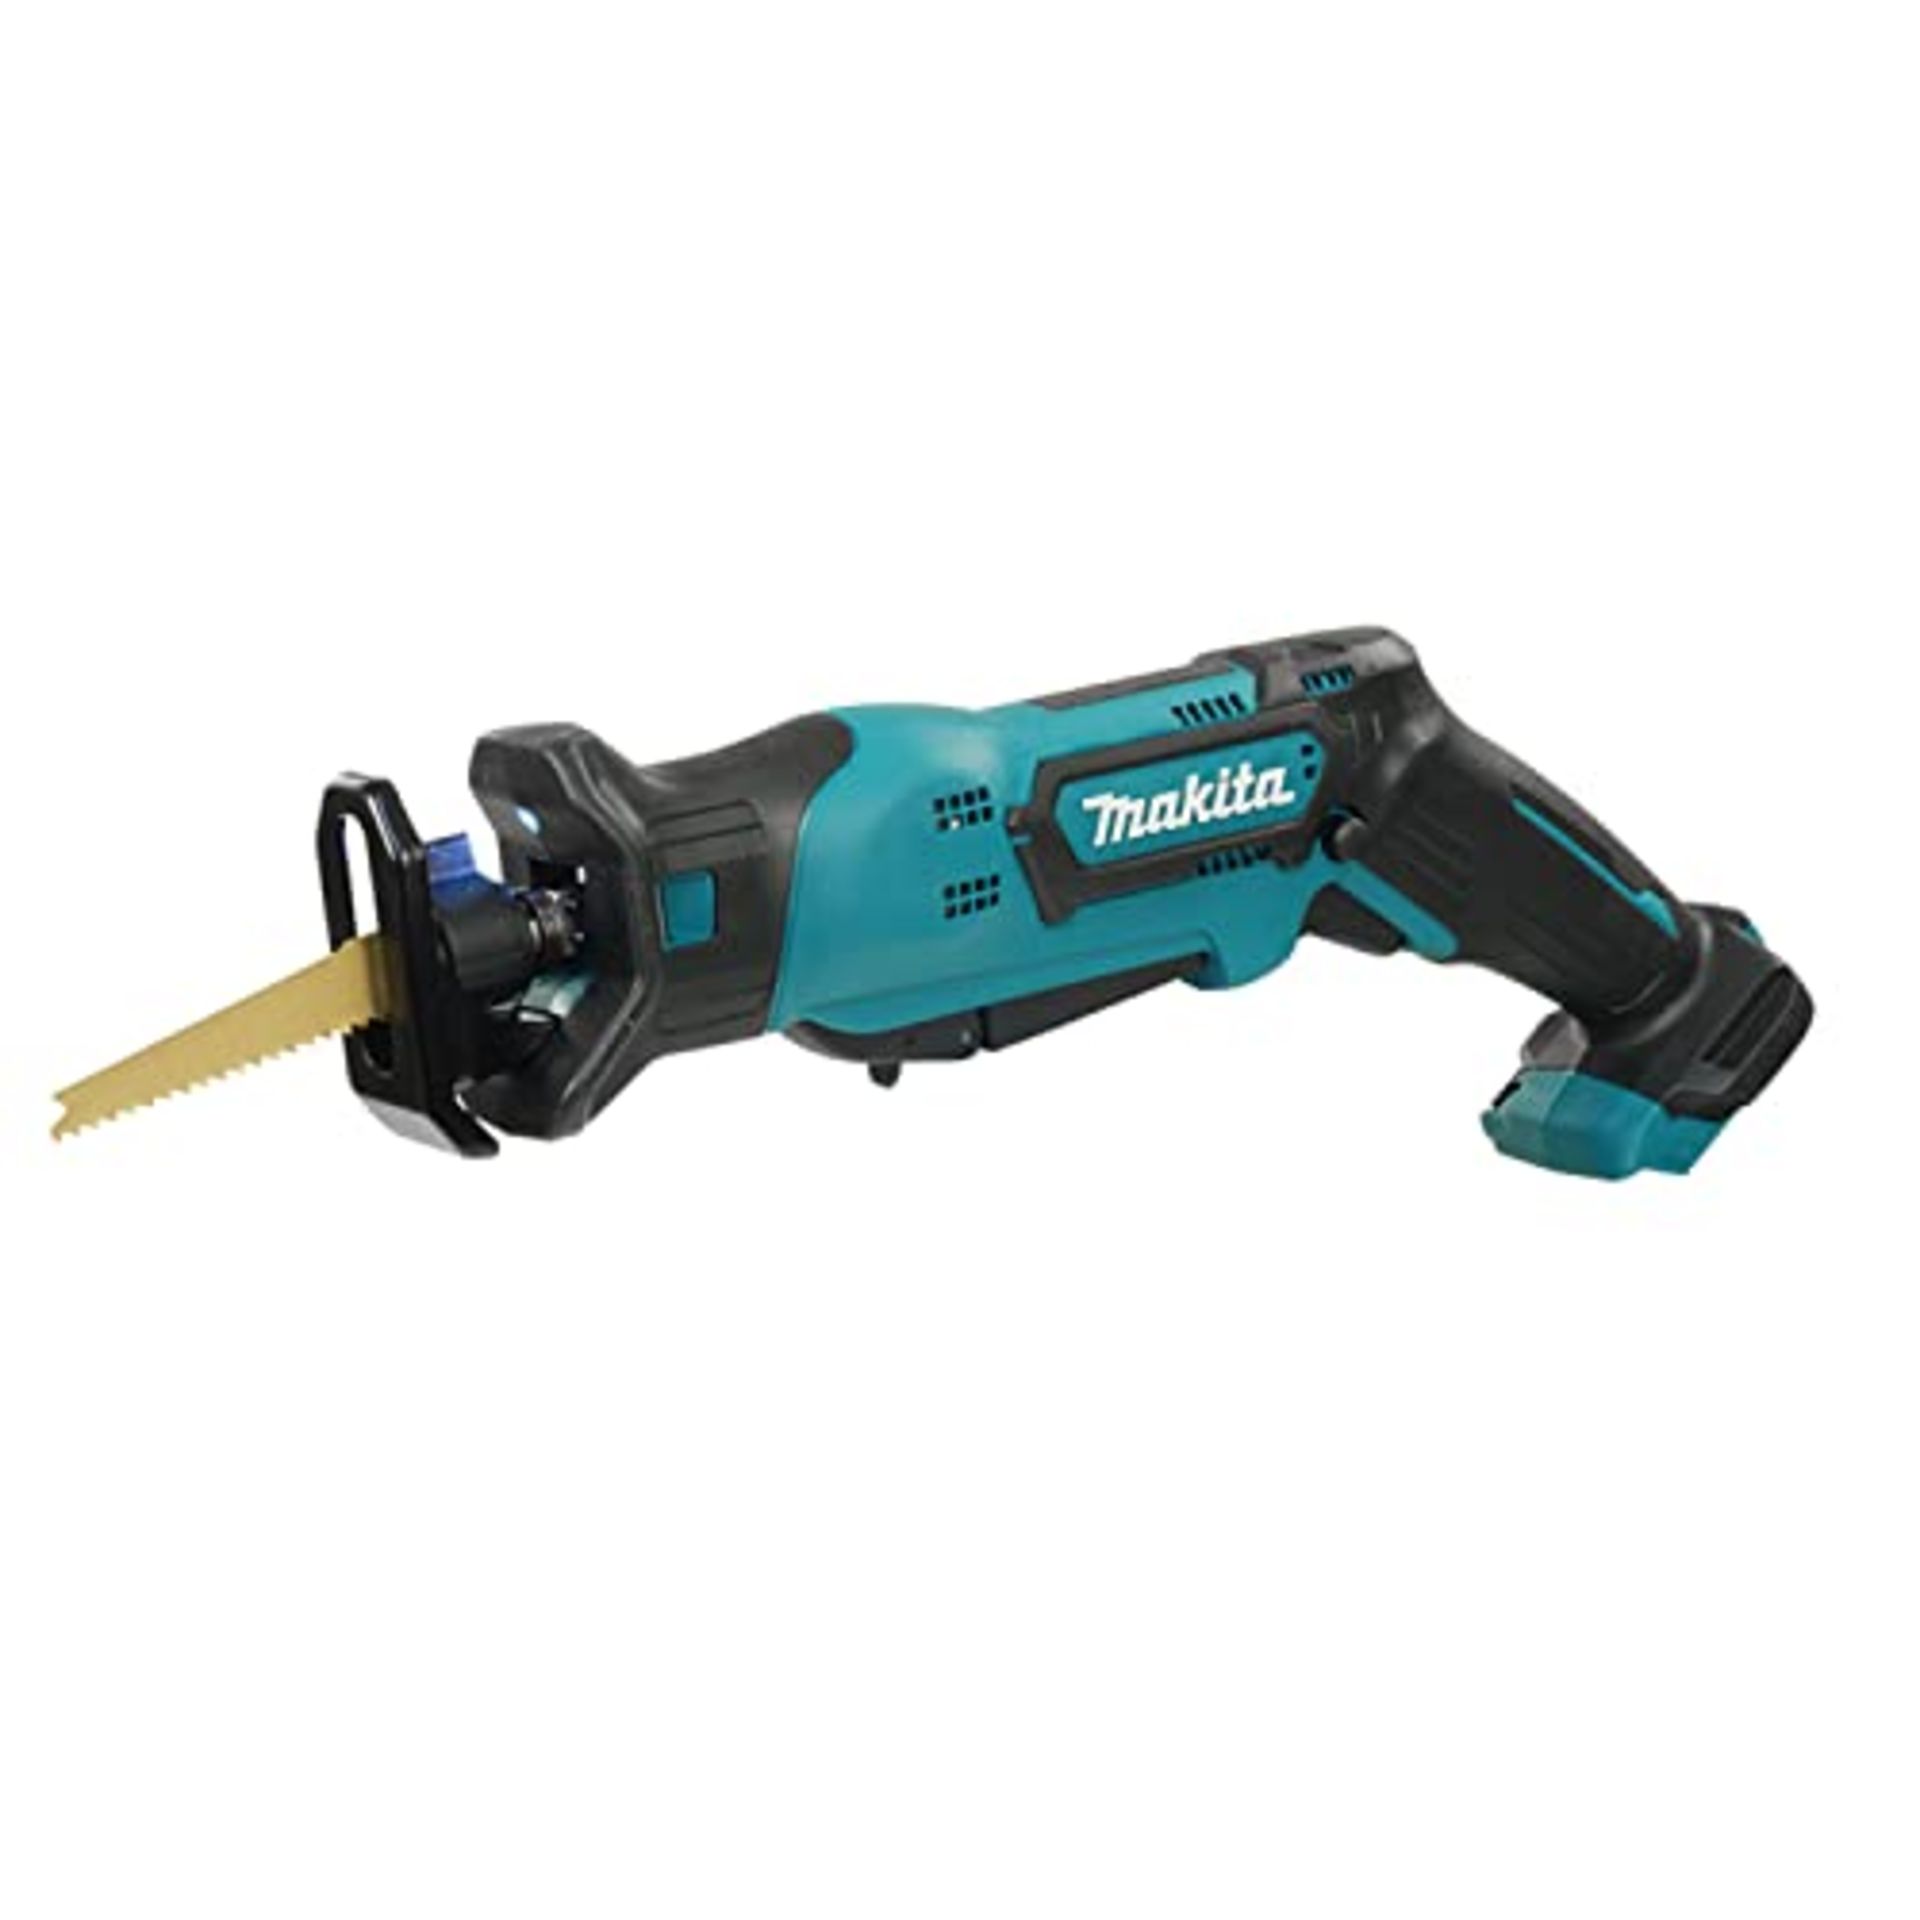 RRP £77.00 Makita JR103DZ Cordless Reciprocating Saw 10.8V (without battery, without charger)